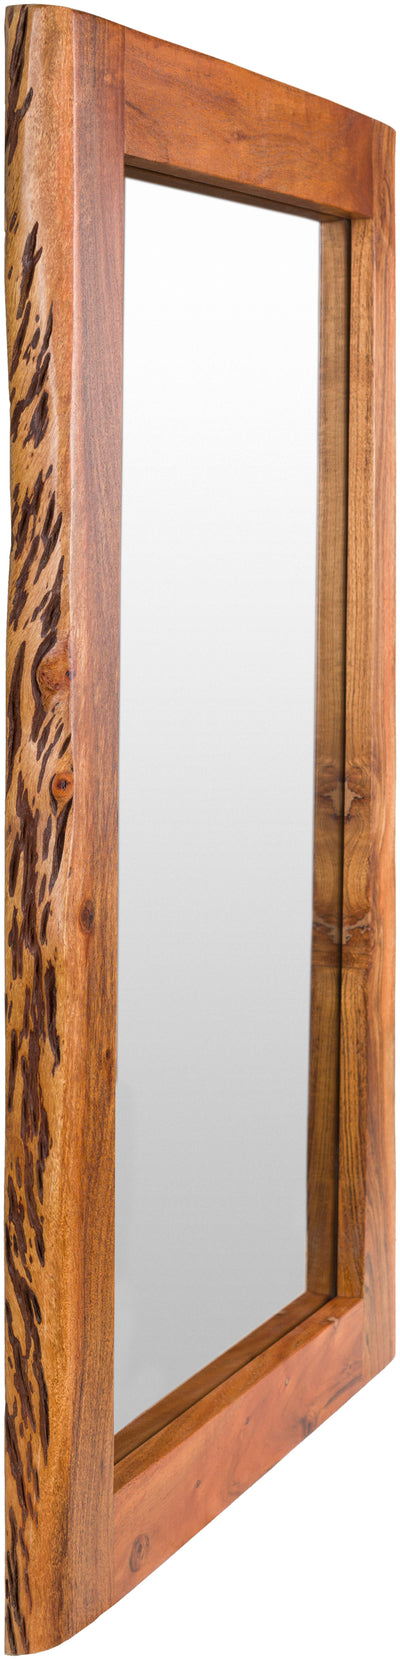 product image for Edge DGE-100 Rectangular Mirror by Surya 83